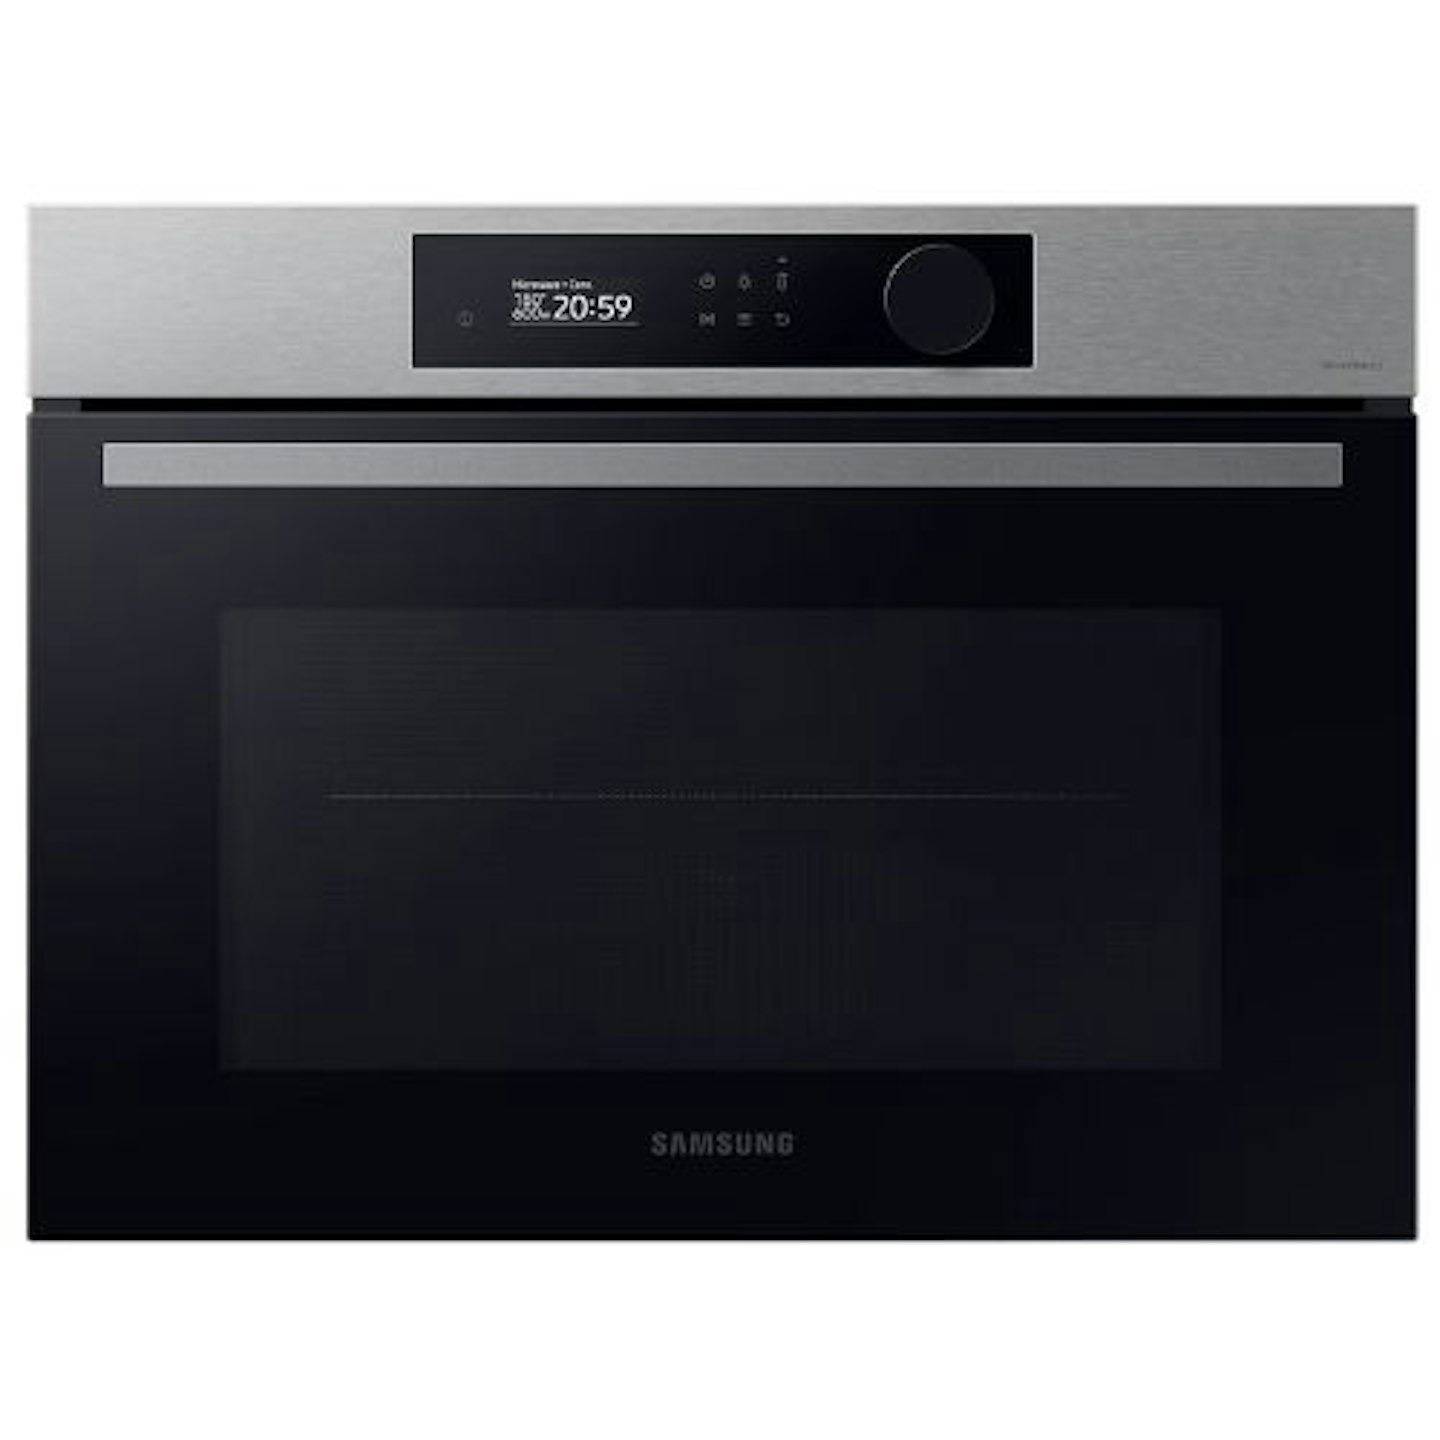 Samsung Series 5 Built-In Combination Microwave Oven